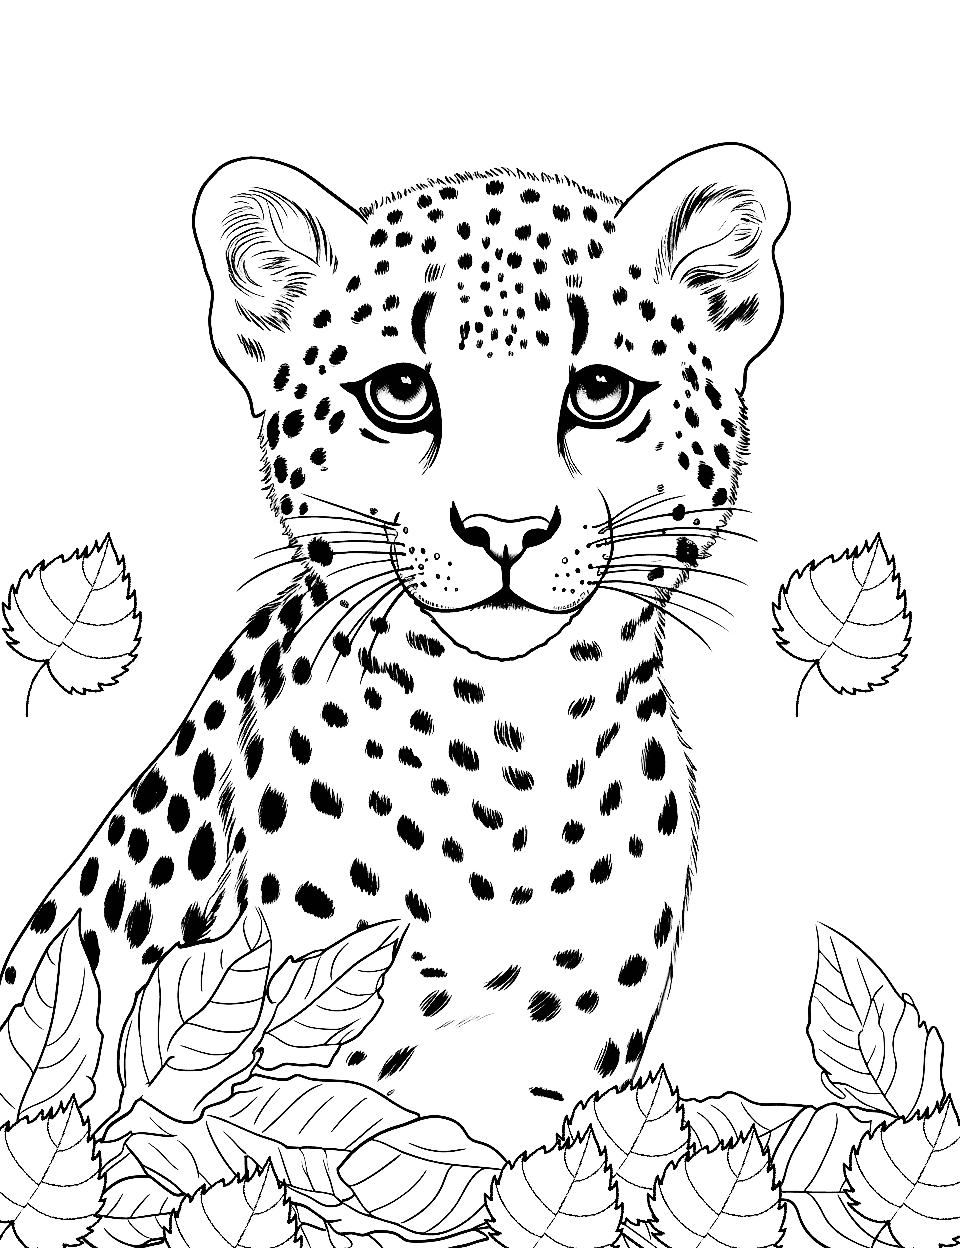 Cheetah with Autumn Leaves Coloring Page - A cheetah surrounded by autumn leaves.